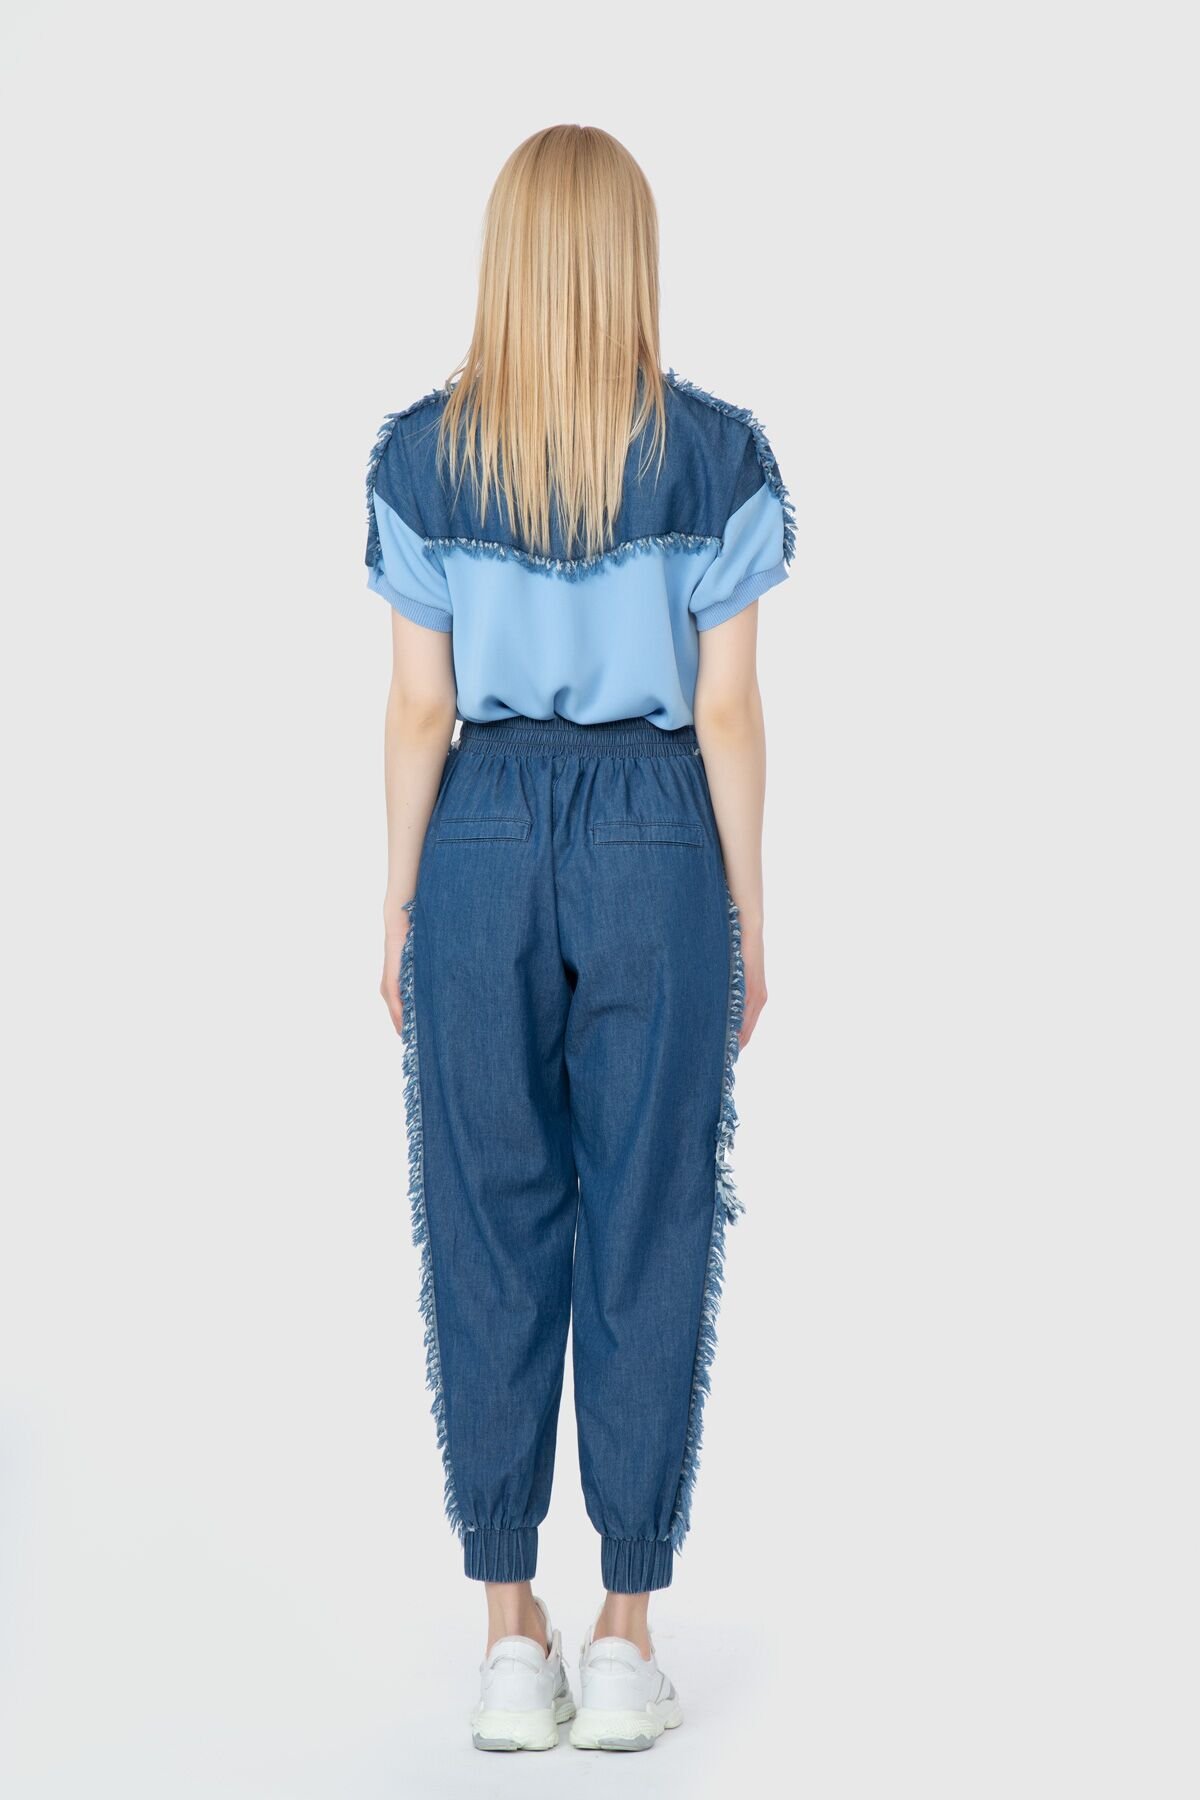 Contrast Jean Detailed Embroidery Blue Trousers